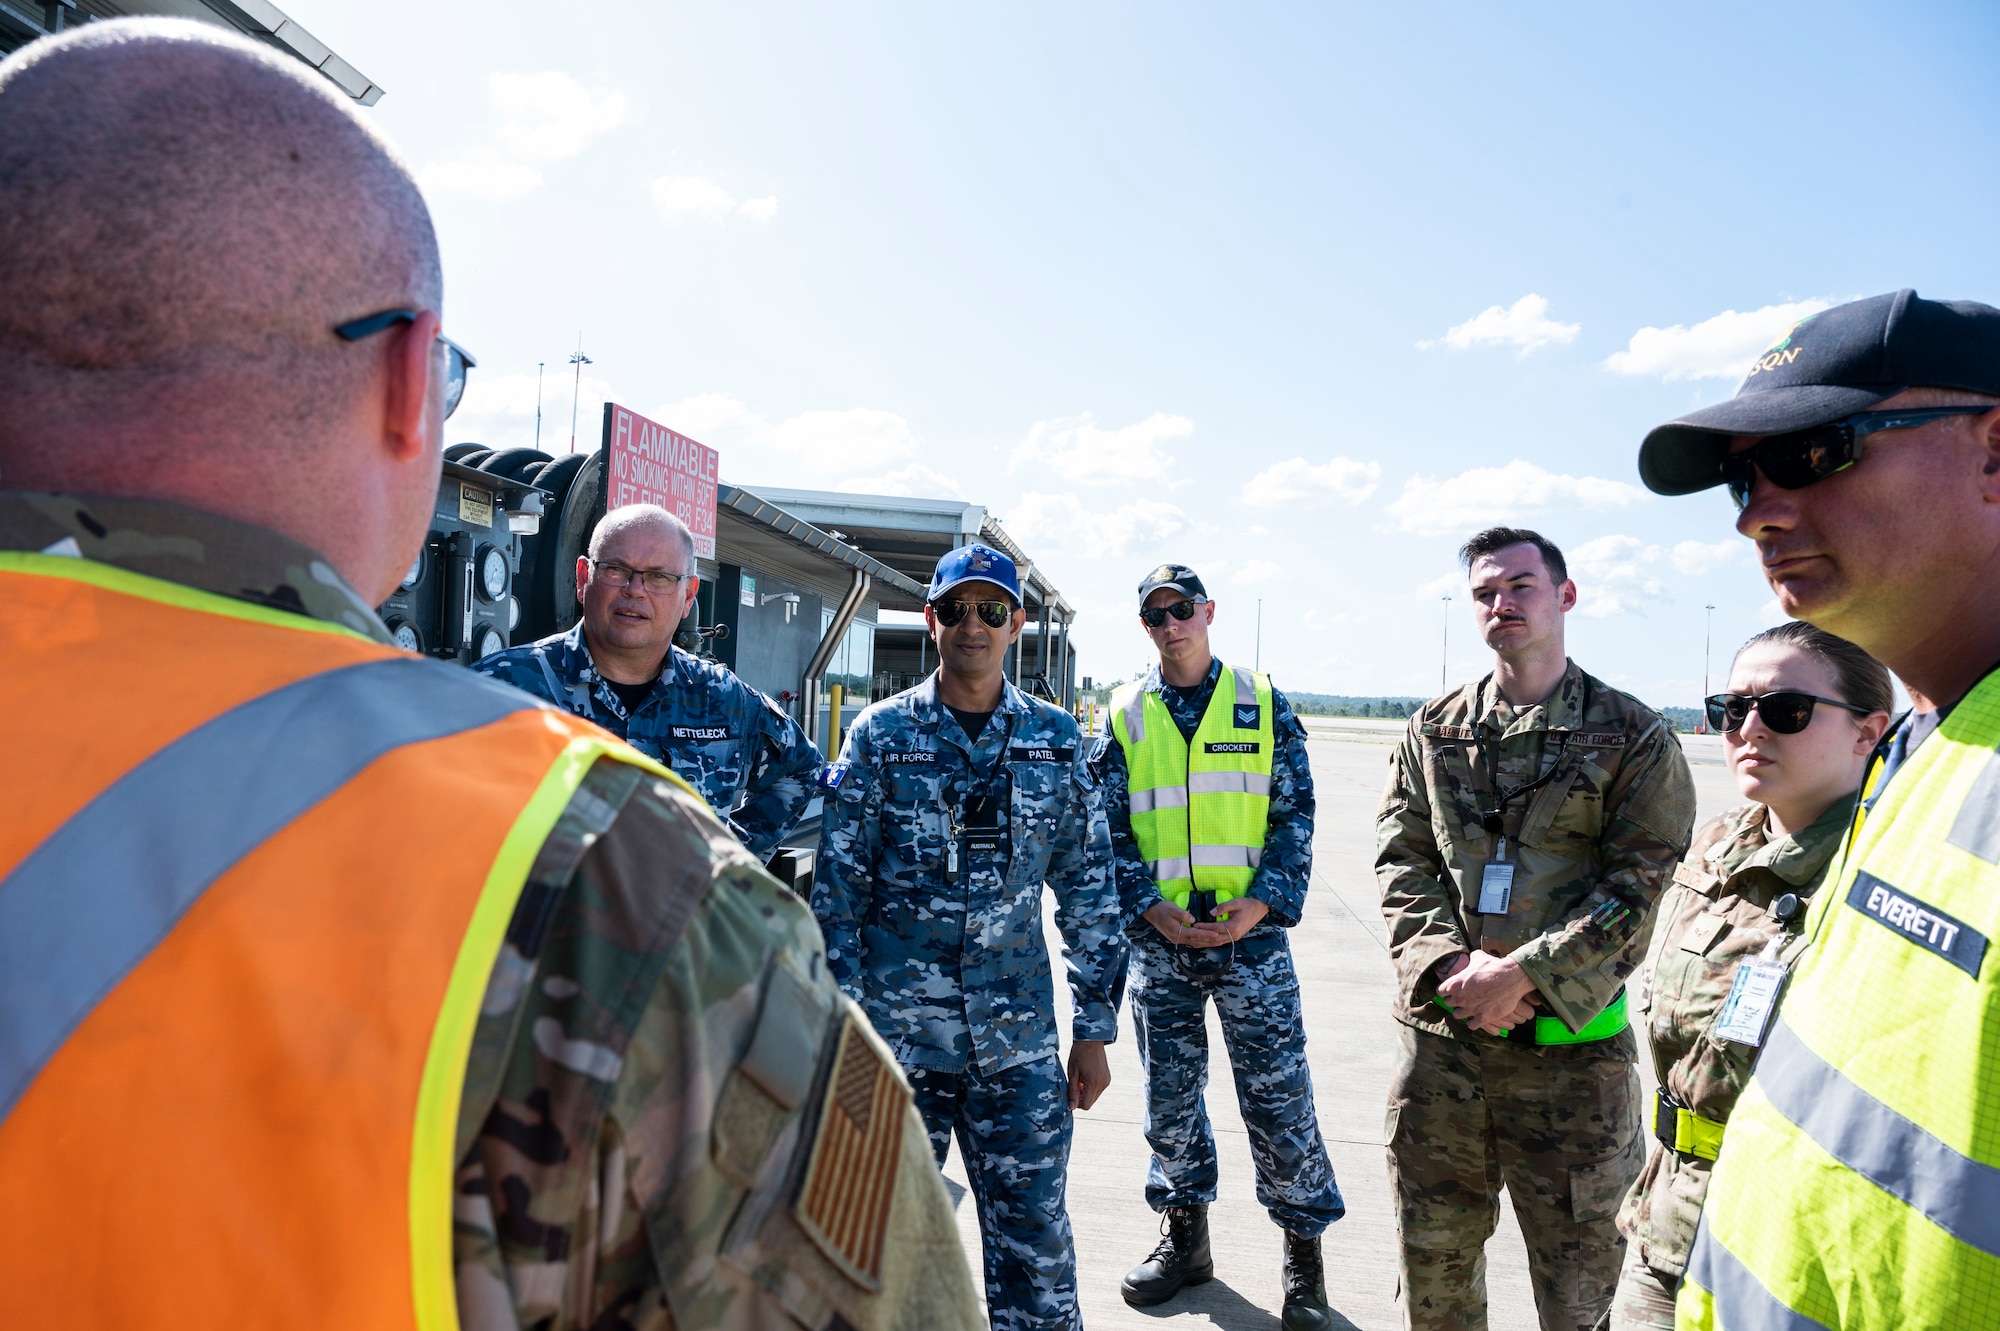 U.S. Air Force Master Sgt. Aaron Porter, 509th Logistics Readiness Squadron fuels superintendent, has a discussion with members from the Royal Australian Air Force at RAAF Base Amberley, Aus., March 22, 2022. Airmen from Whiteman Air Force Base, Missouri were in Australia to assist a B-2 on a CONUS-to-CONUS mission. While the B-2 crews were teaming up with RAAF counterparts and U.S. teammates in the air, other U.S. Airmen were conducting joint operations on the ground. (U.S. Air Force photo illustration by Tech. Sgt. Hailey Haux)